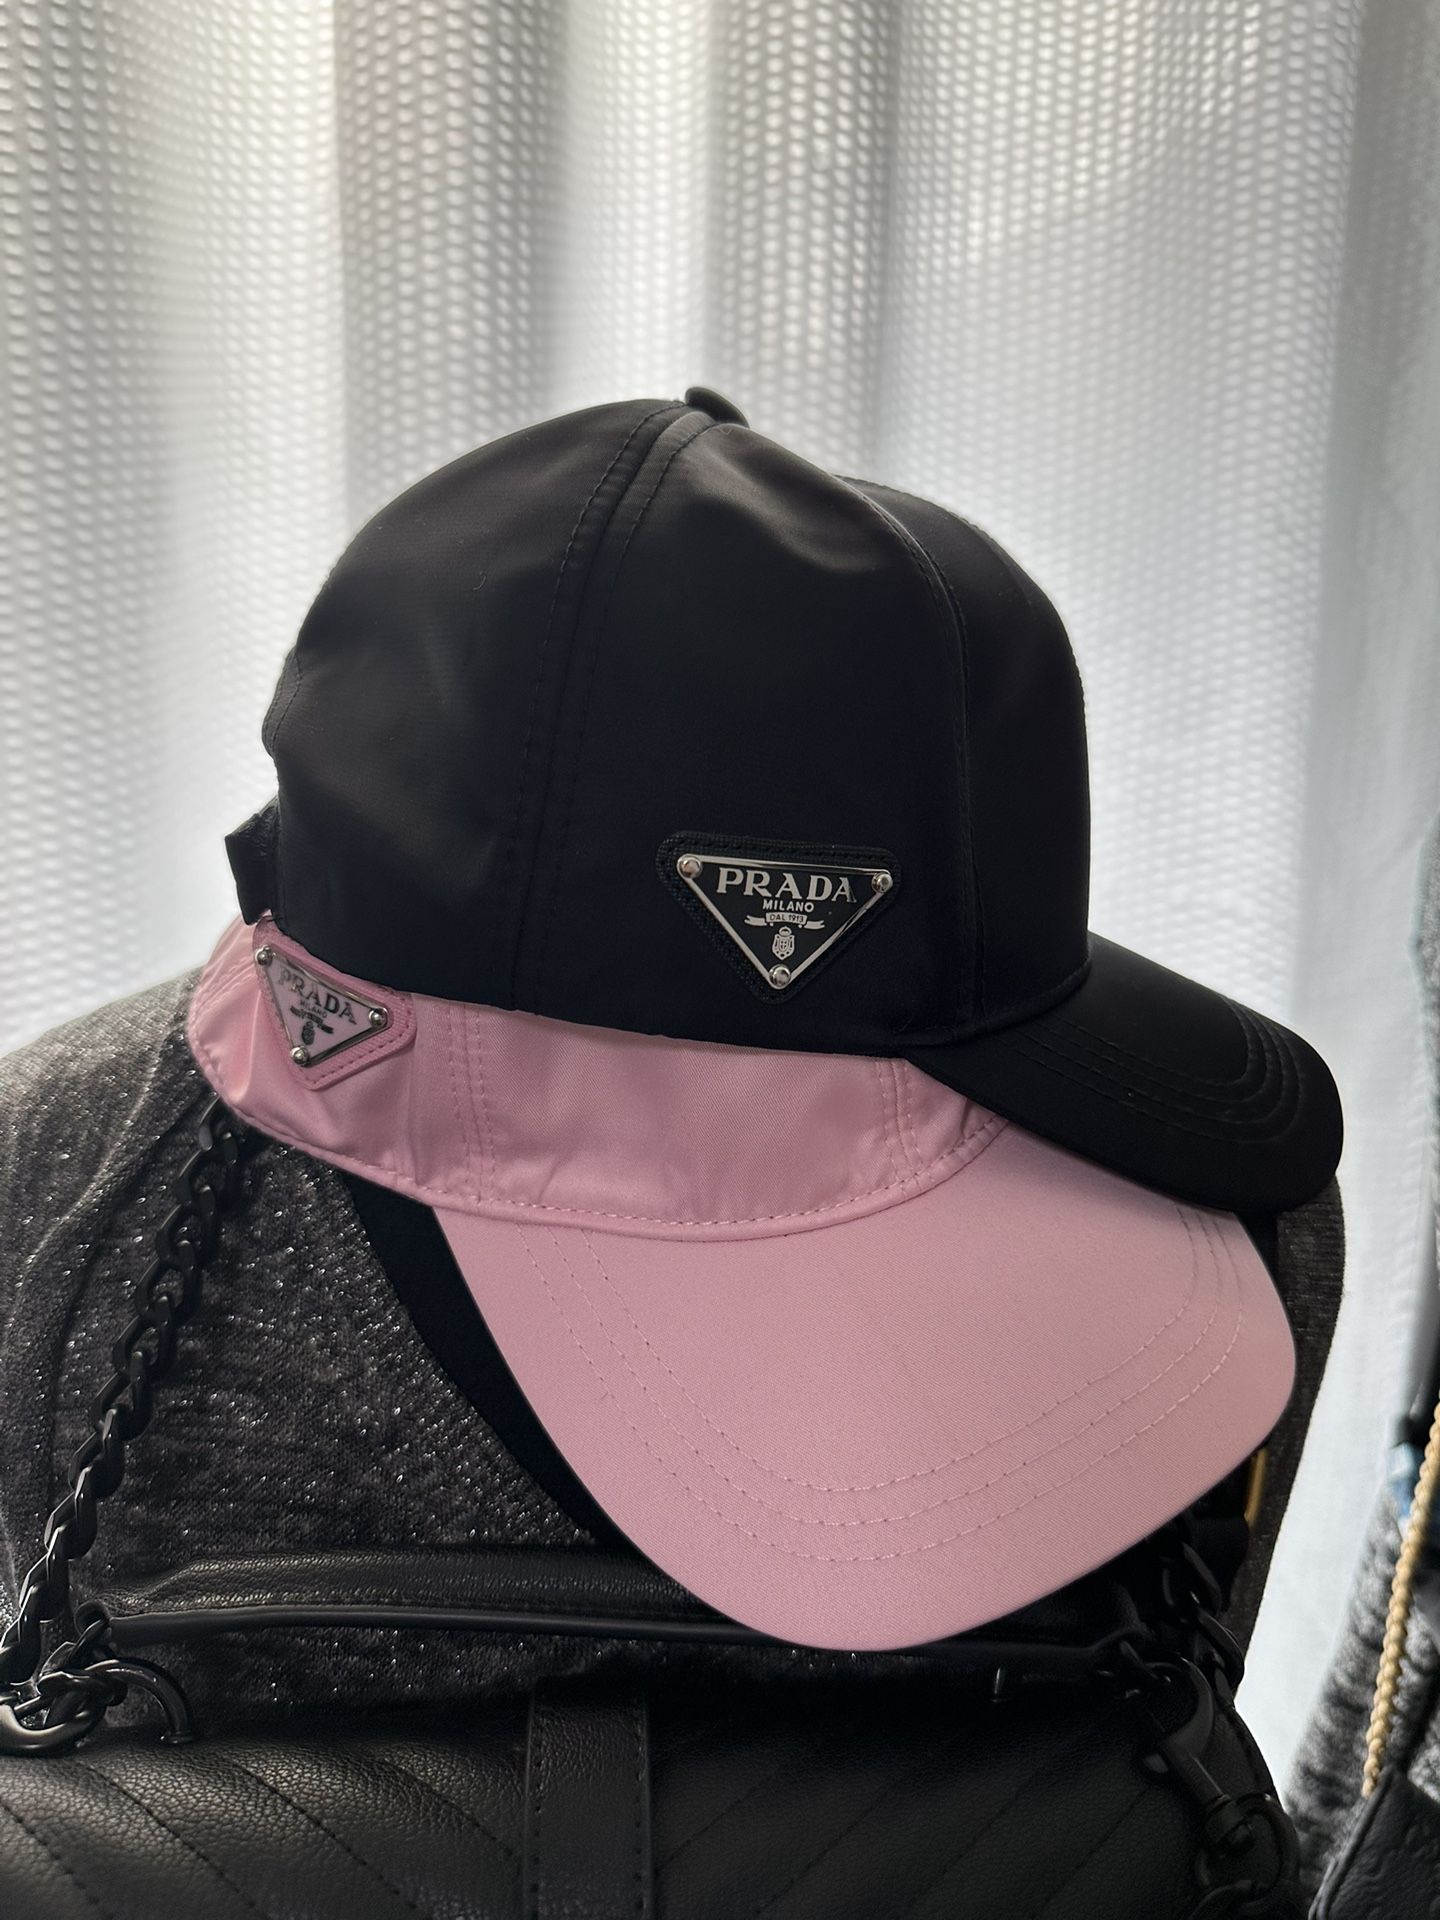 Two Sport Cap Hats for $99 ~ 1 Pink Hat & 1 Black Hat